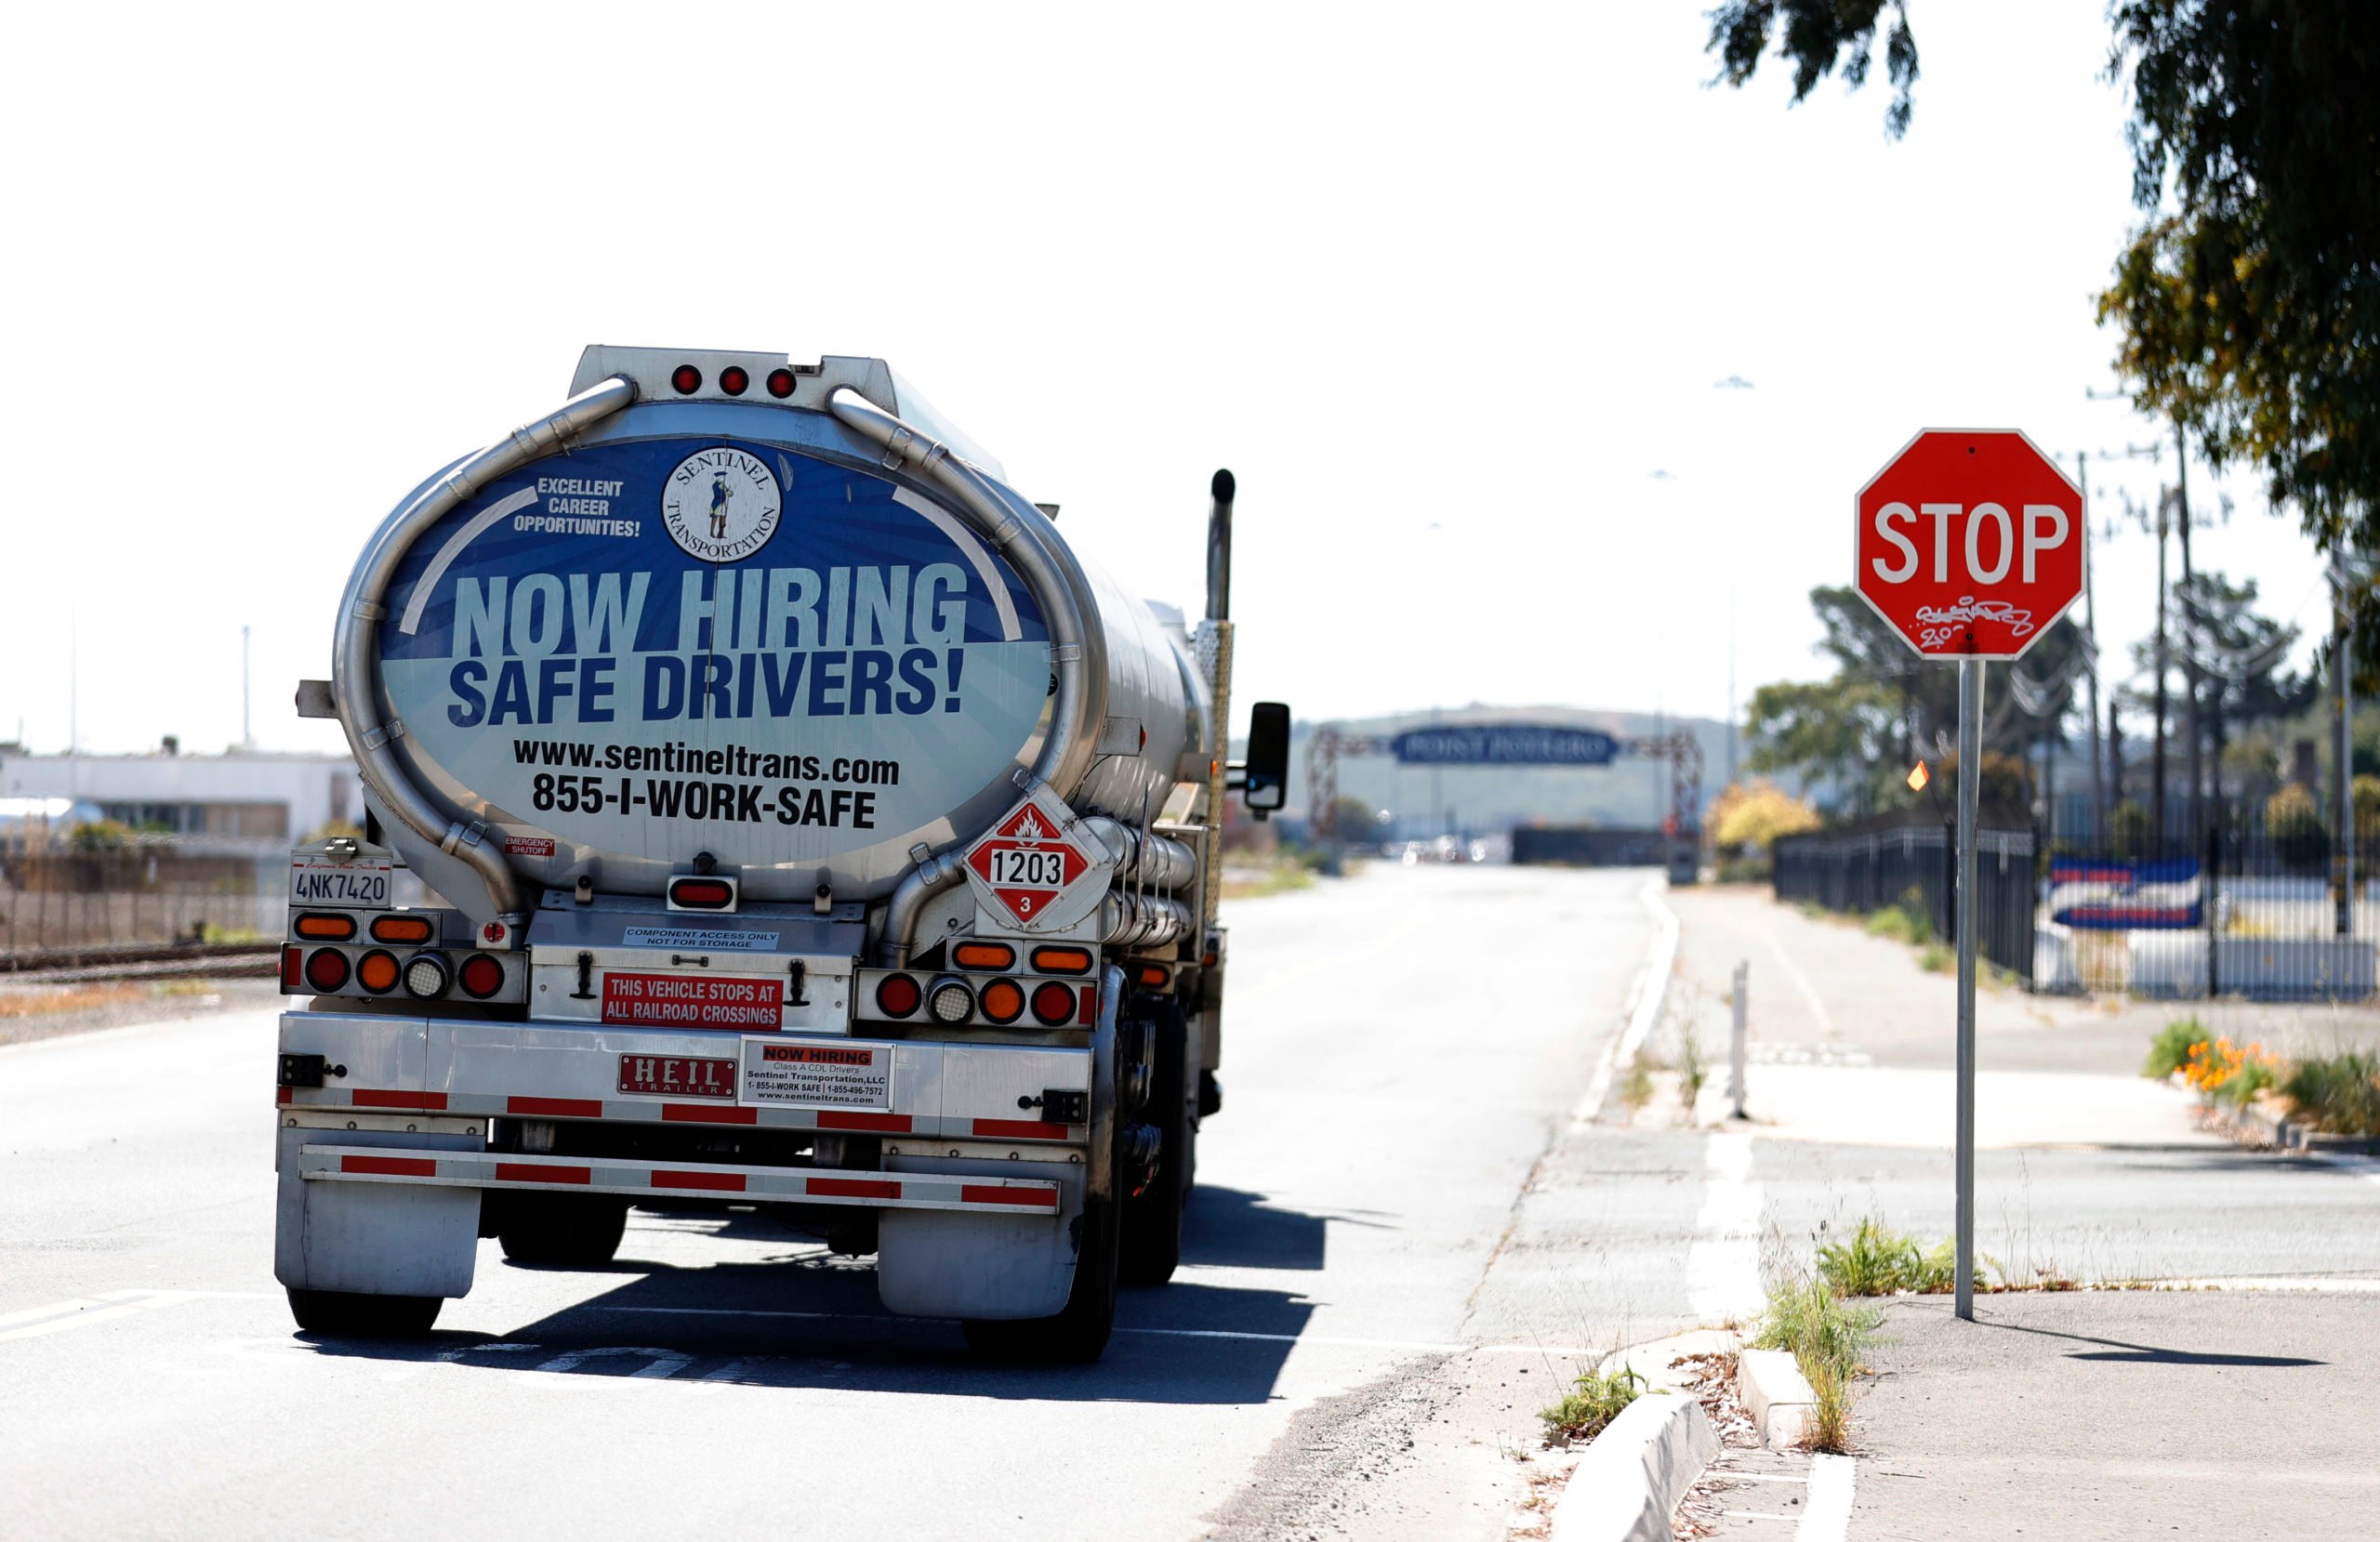 RICHMOND, CALIFORNIA - APRIL 29: A now hiring advertisement appears on the back of a fuel trucks on April 29, 2021 in Richmond, California. A lack of qualified truck drivers could lead to a shortage and gasoline this summer and could cause prices to spike. A gallon of regular unleaded gas is already at or around $4.00 in parts of California. (Photo by Justin Sullivan/Getty Images)